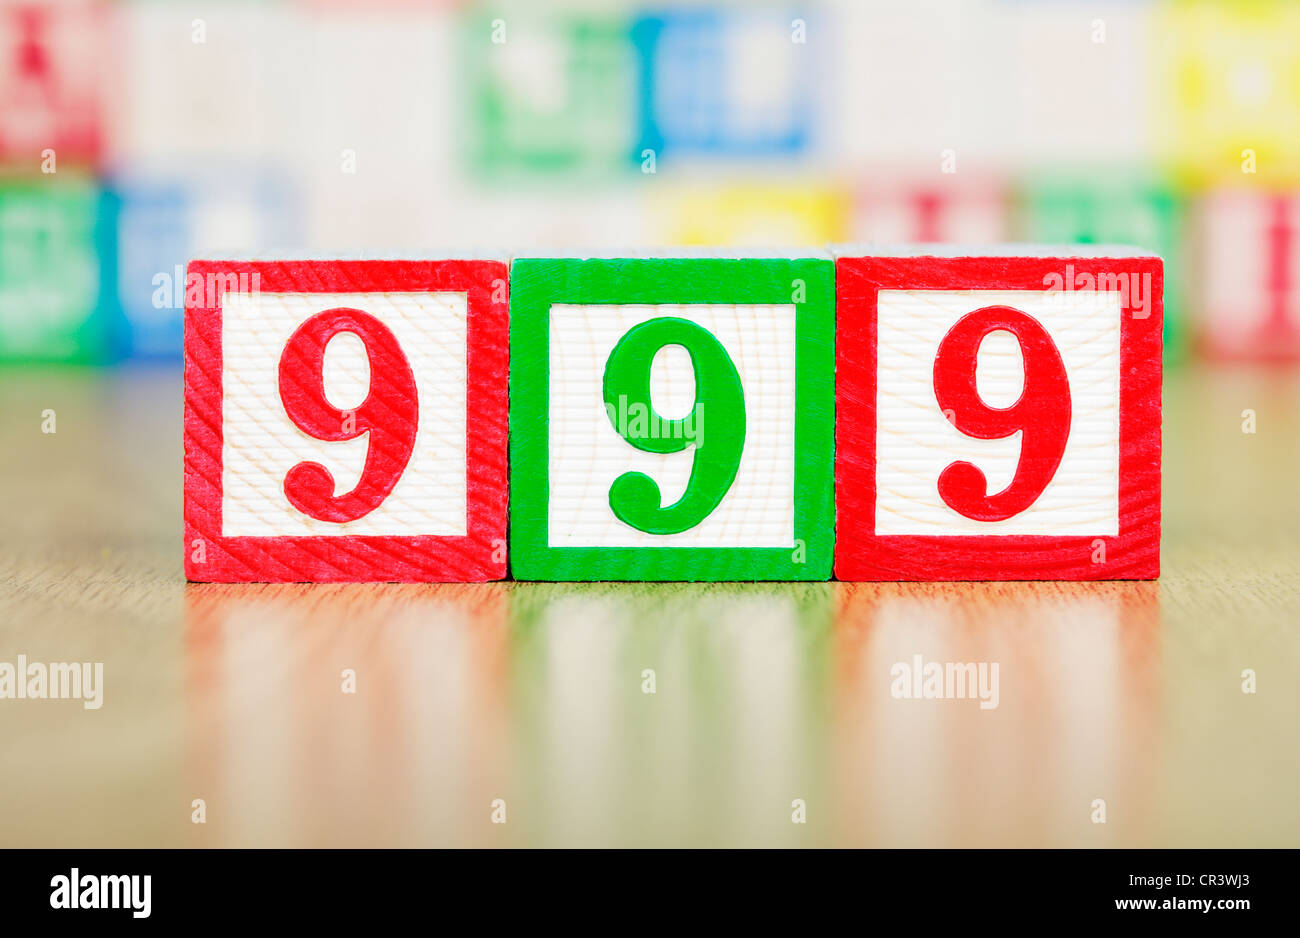 Emergency Number 999 in Child's Building Blocks Stock Photo